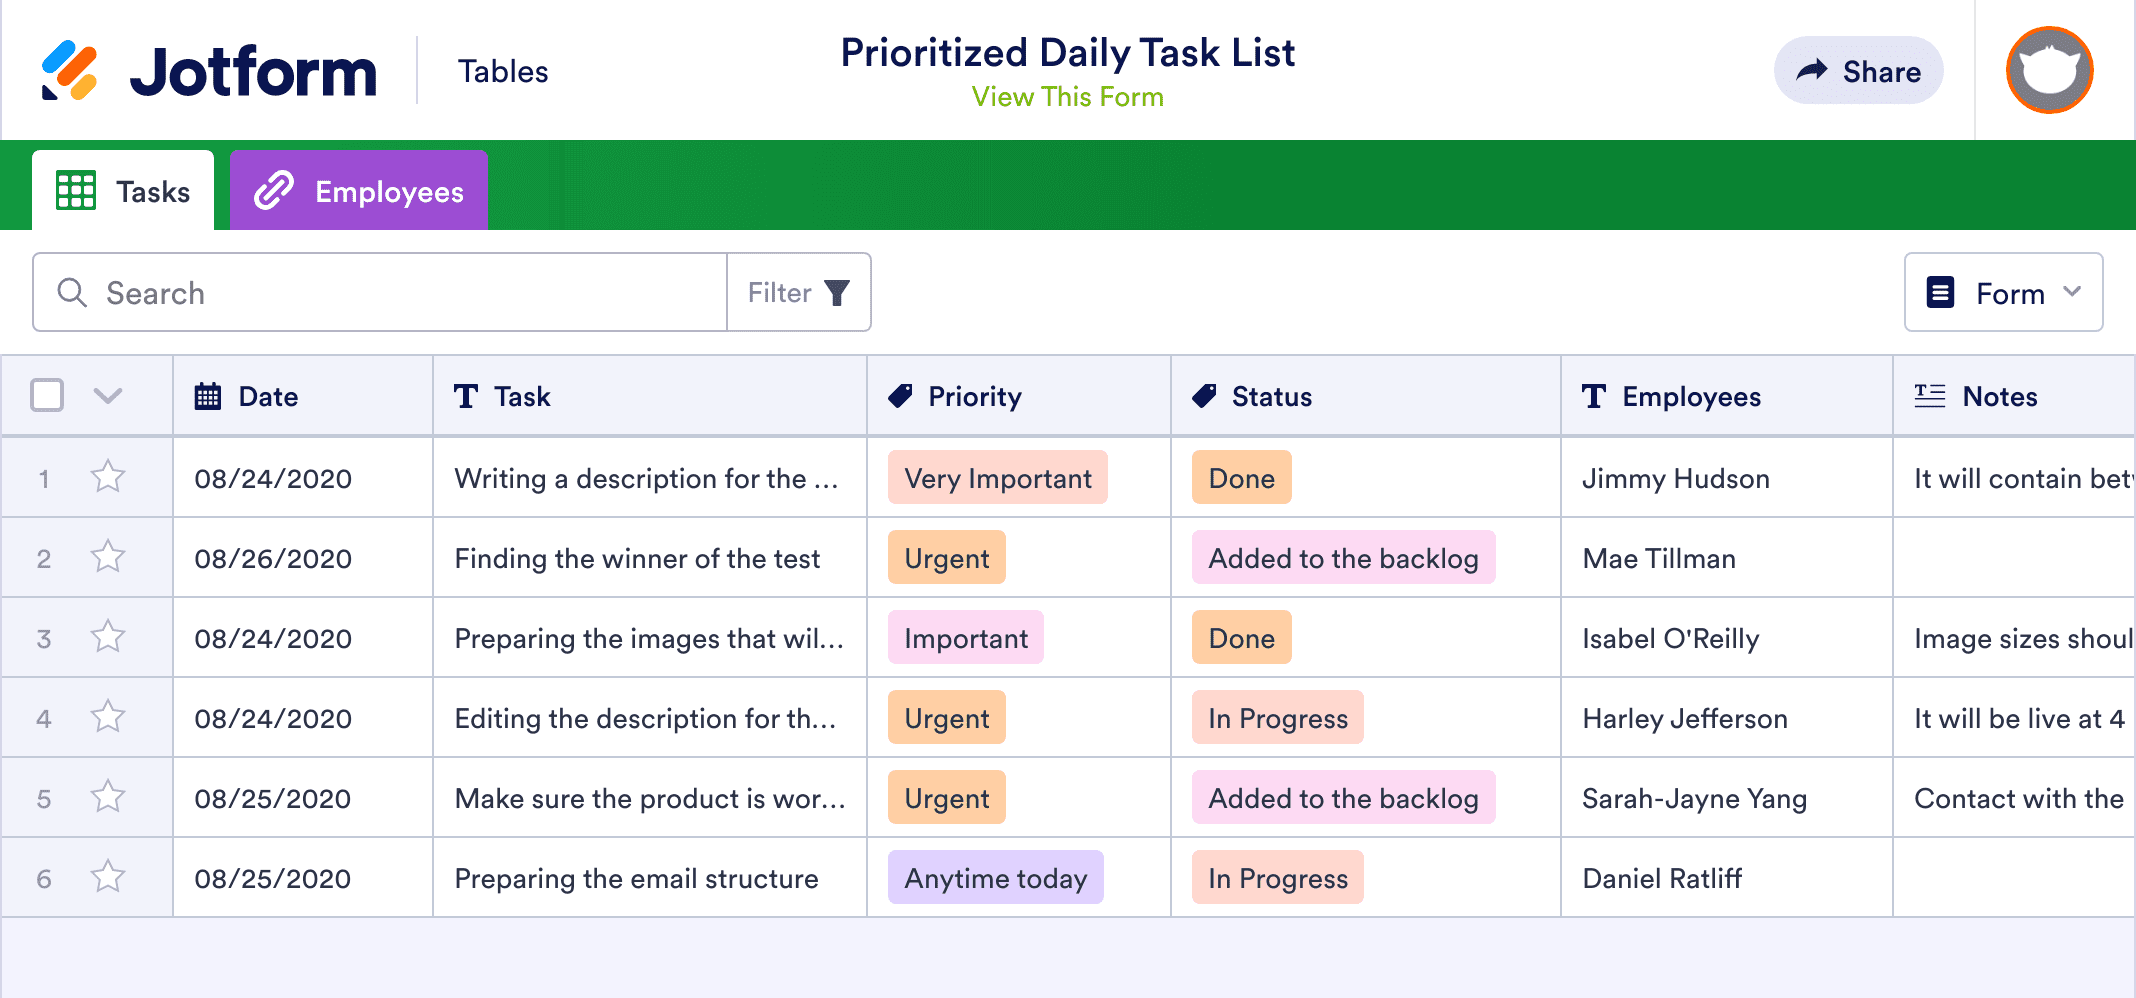 Prioritized Daily Task List